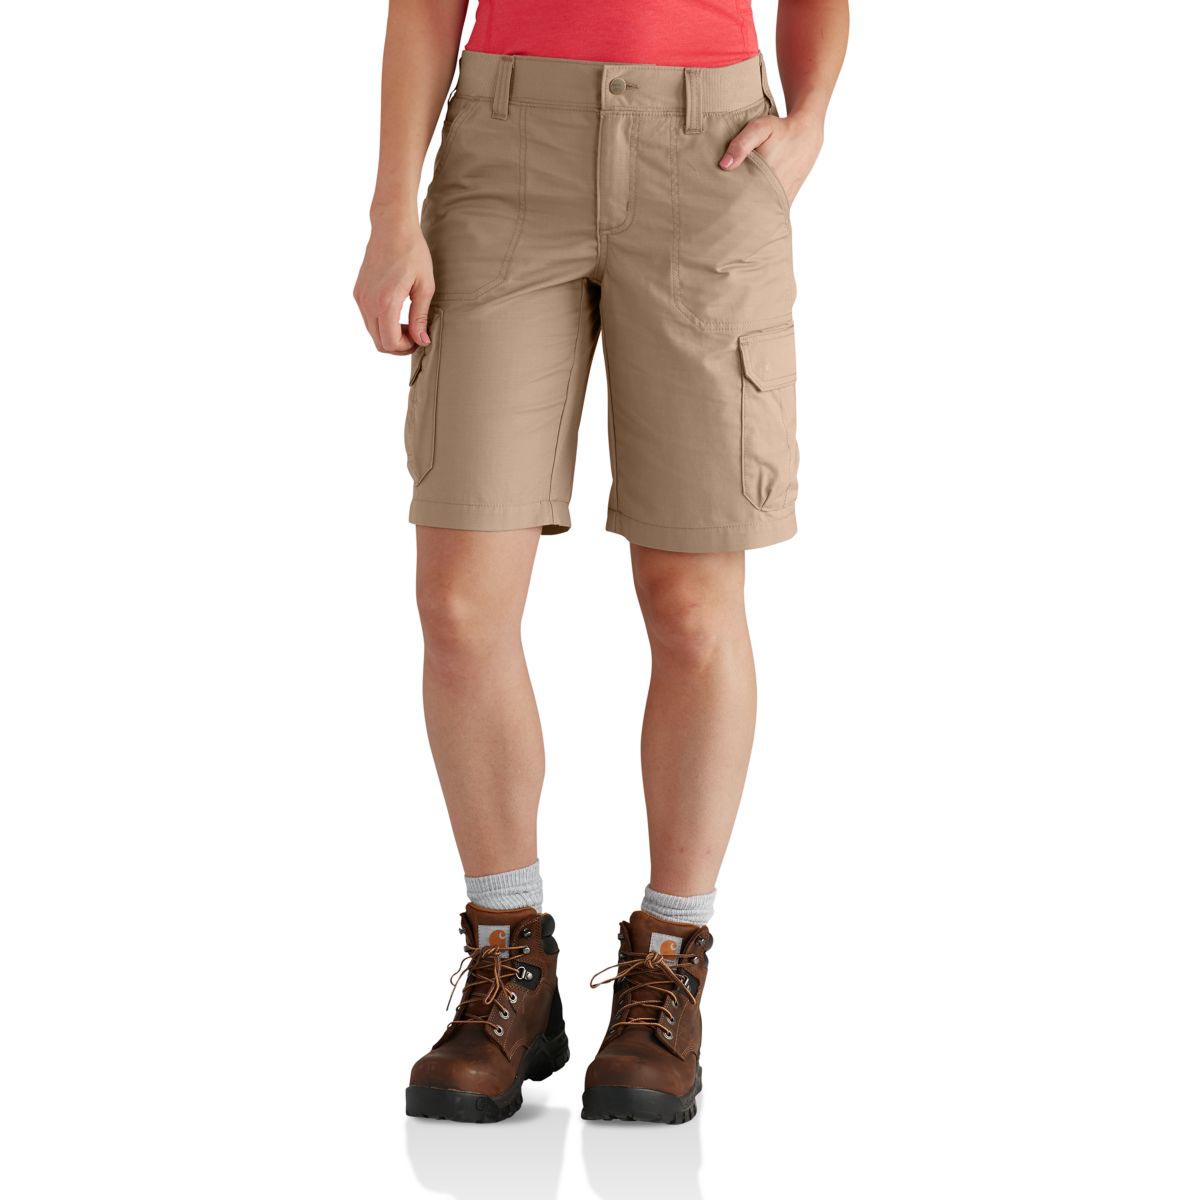 Carhartt Women's Force Extremes Short